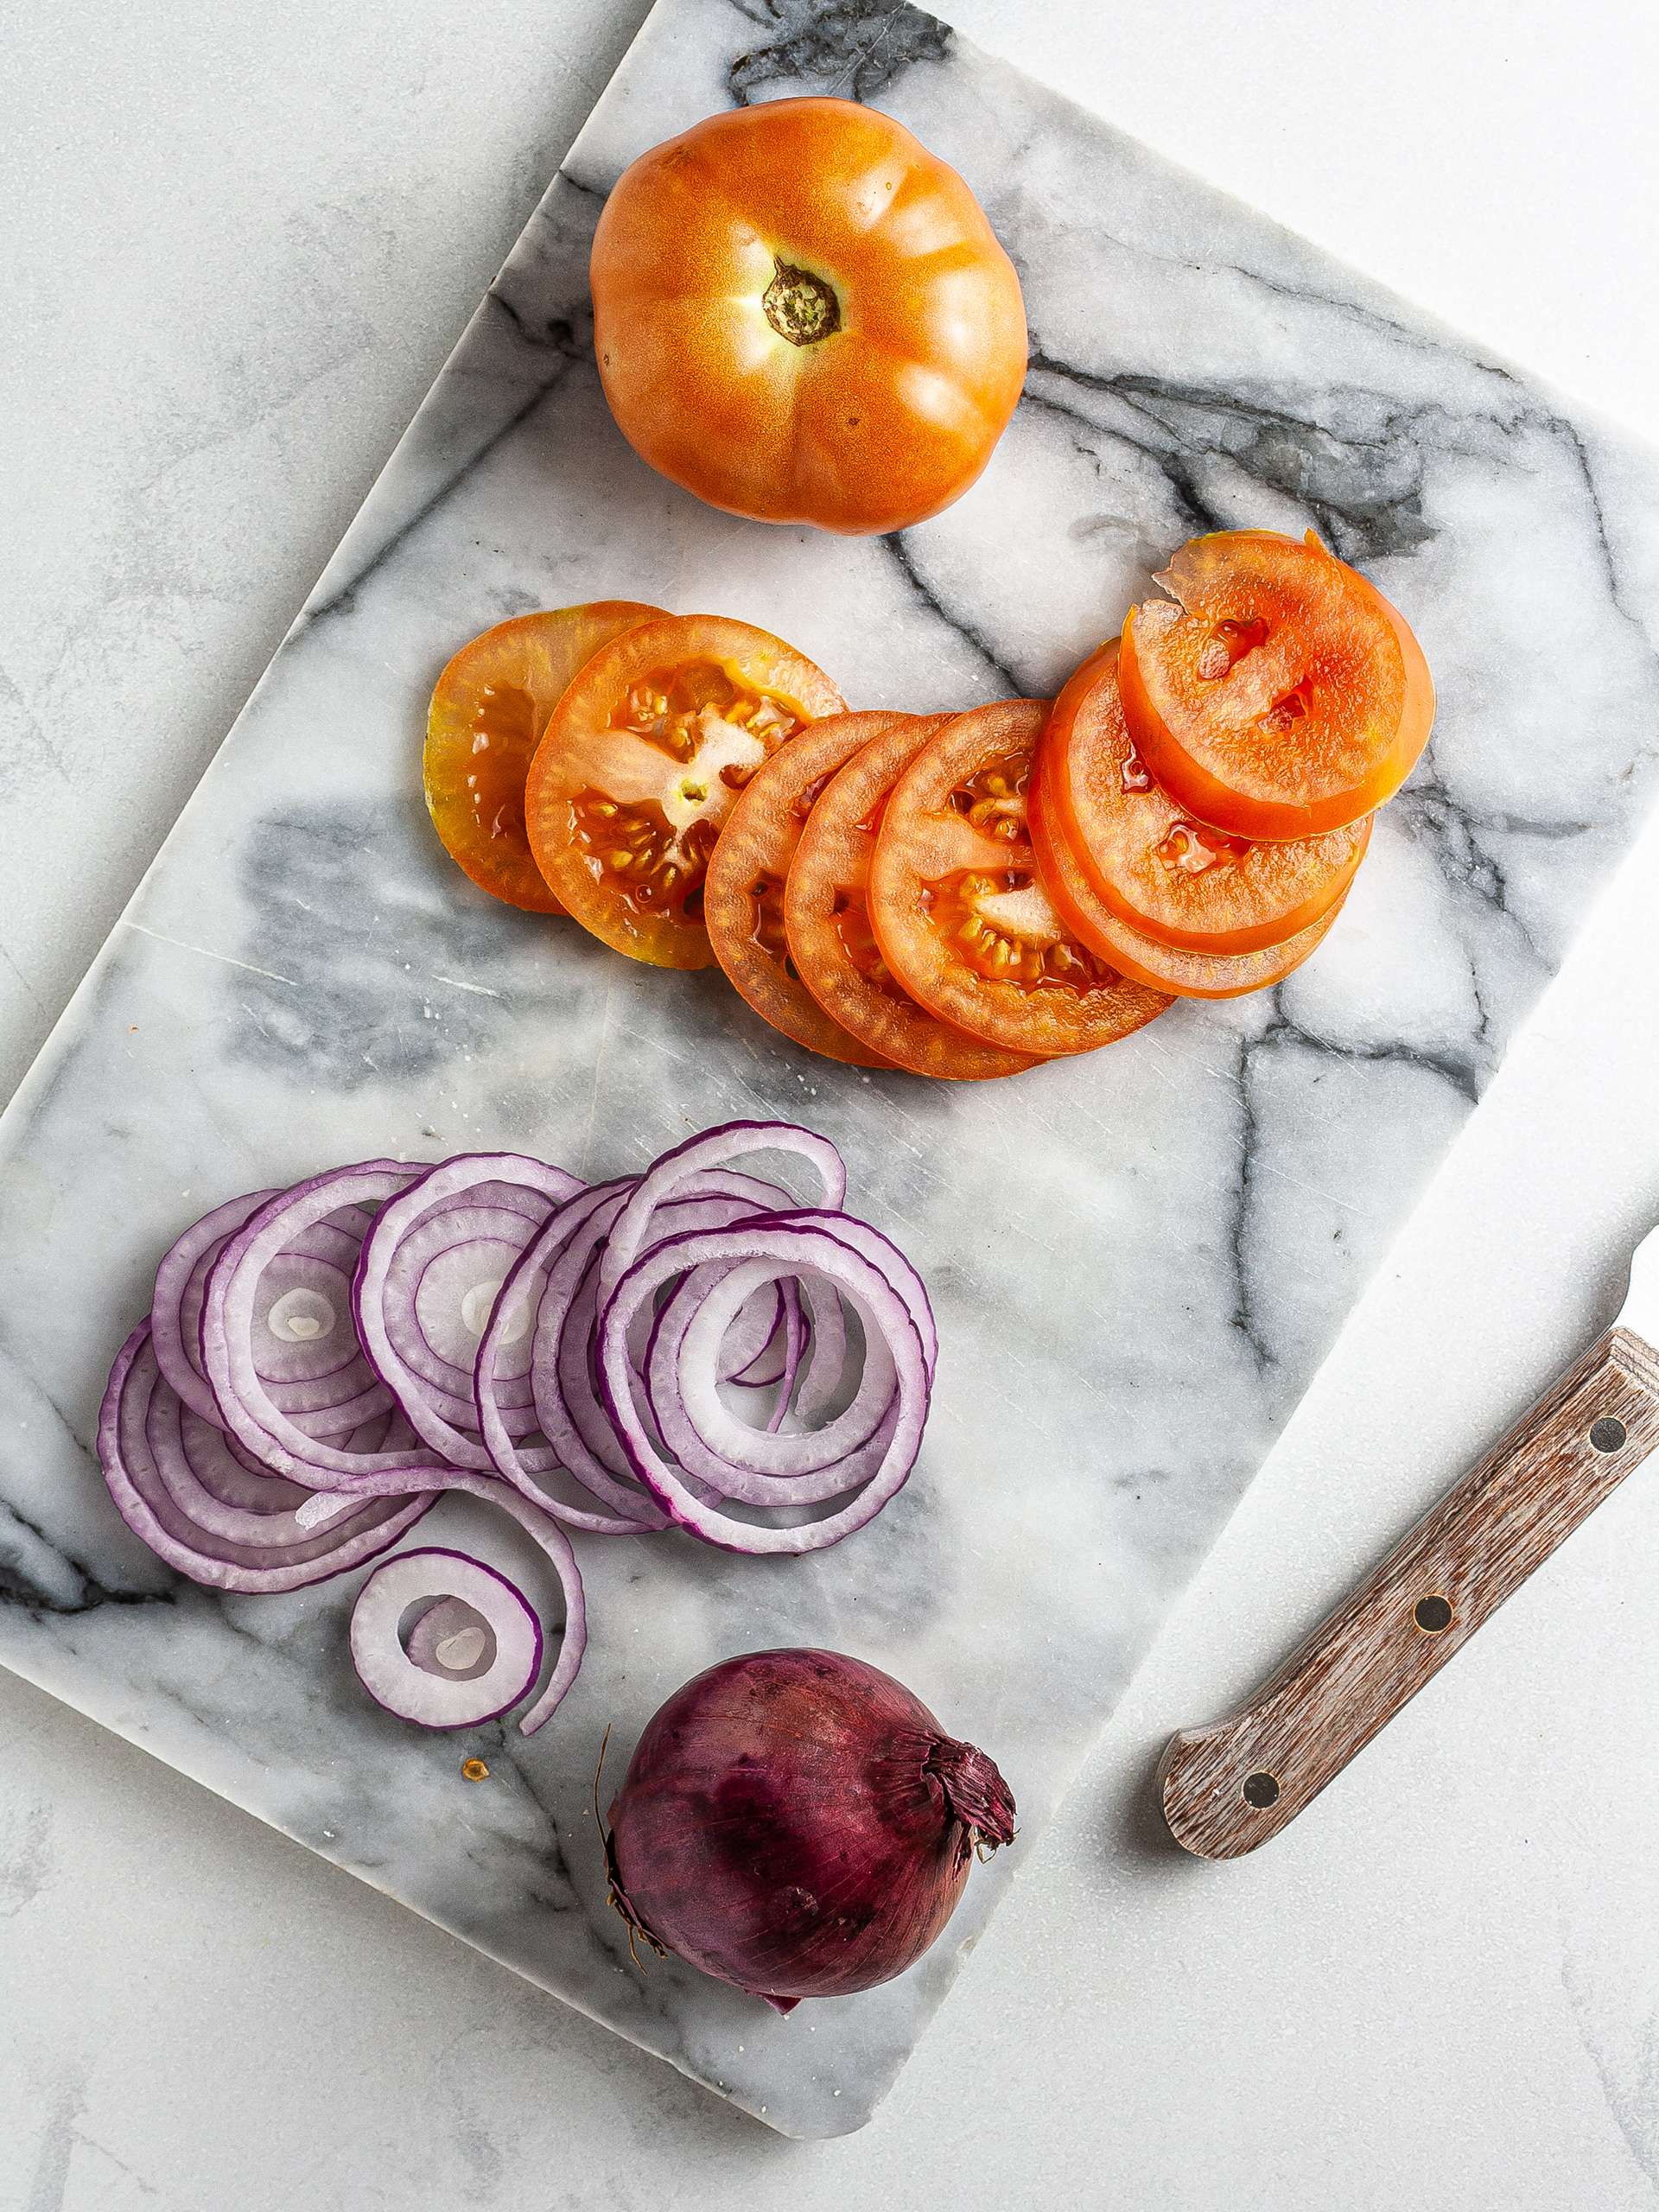 Sliced tomatoes and onions